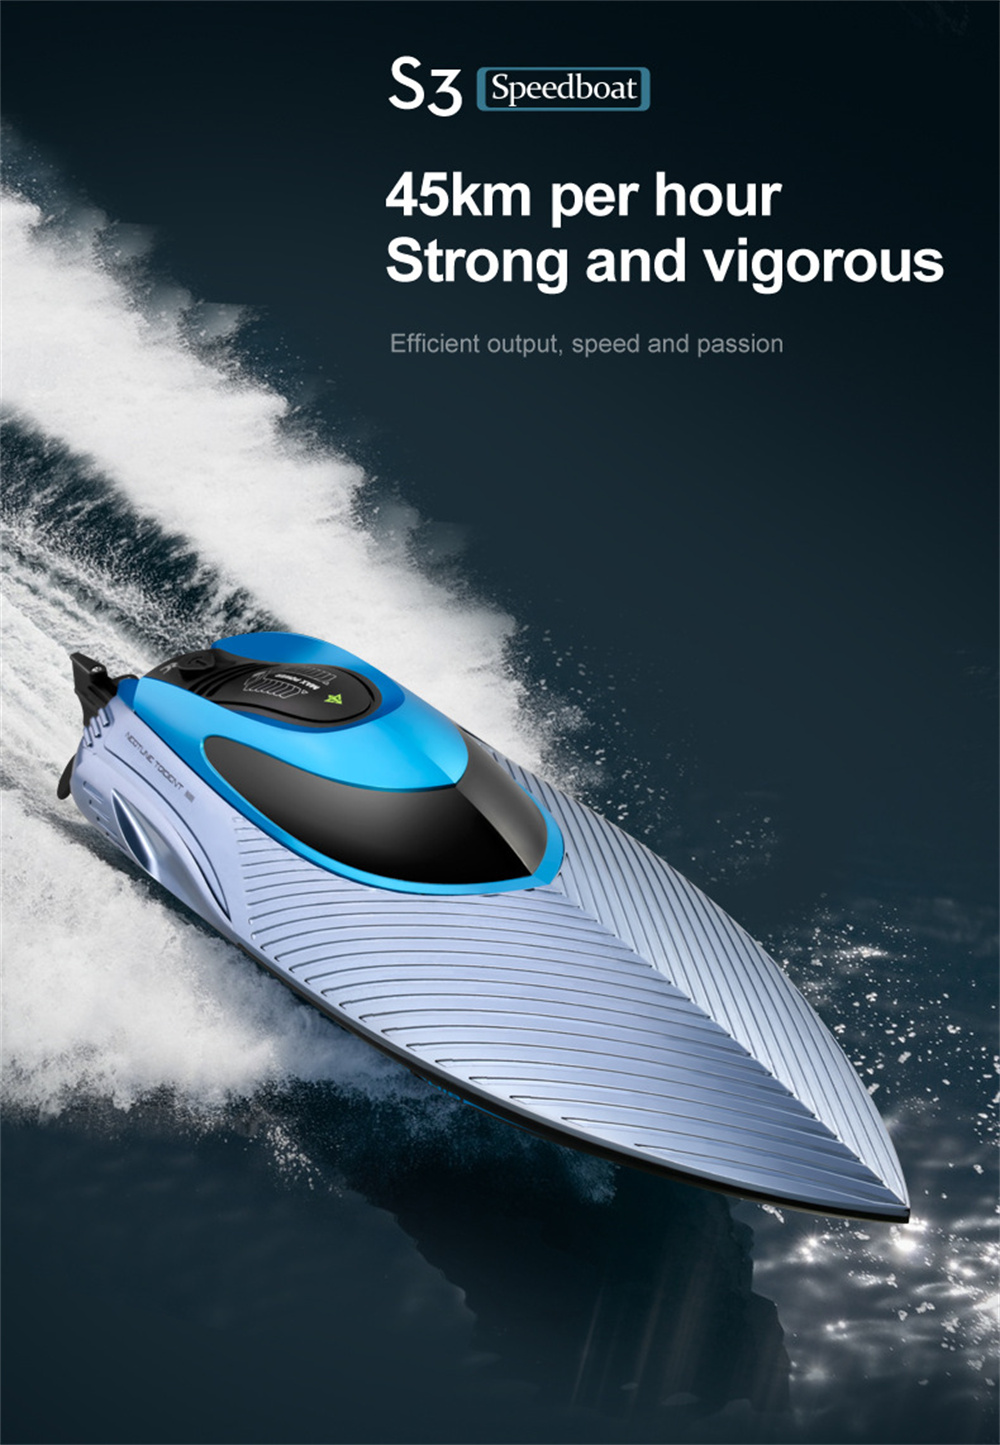 4DRC S3 2.4G 45km/h RC Boat Fast High Speed Capsized Reset LED Light Water Model Remote Control Toys RTR Pools Lakes Racing Kids Children Gift